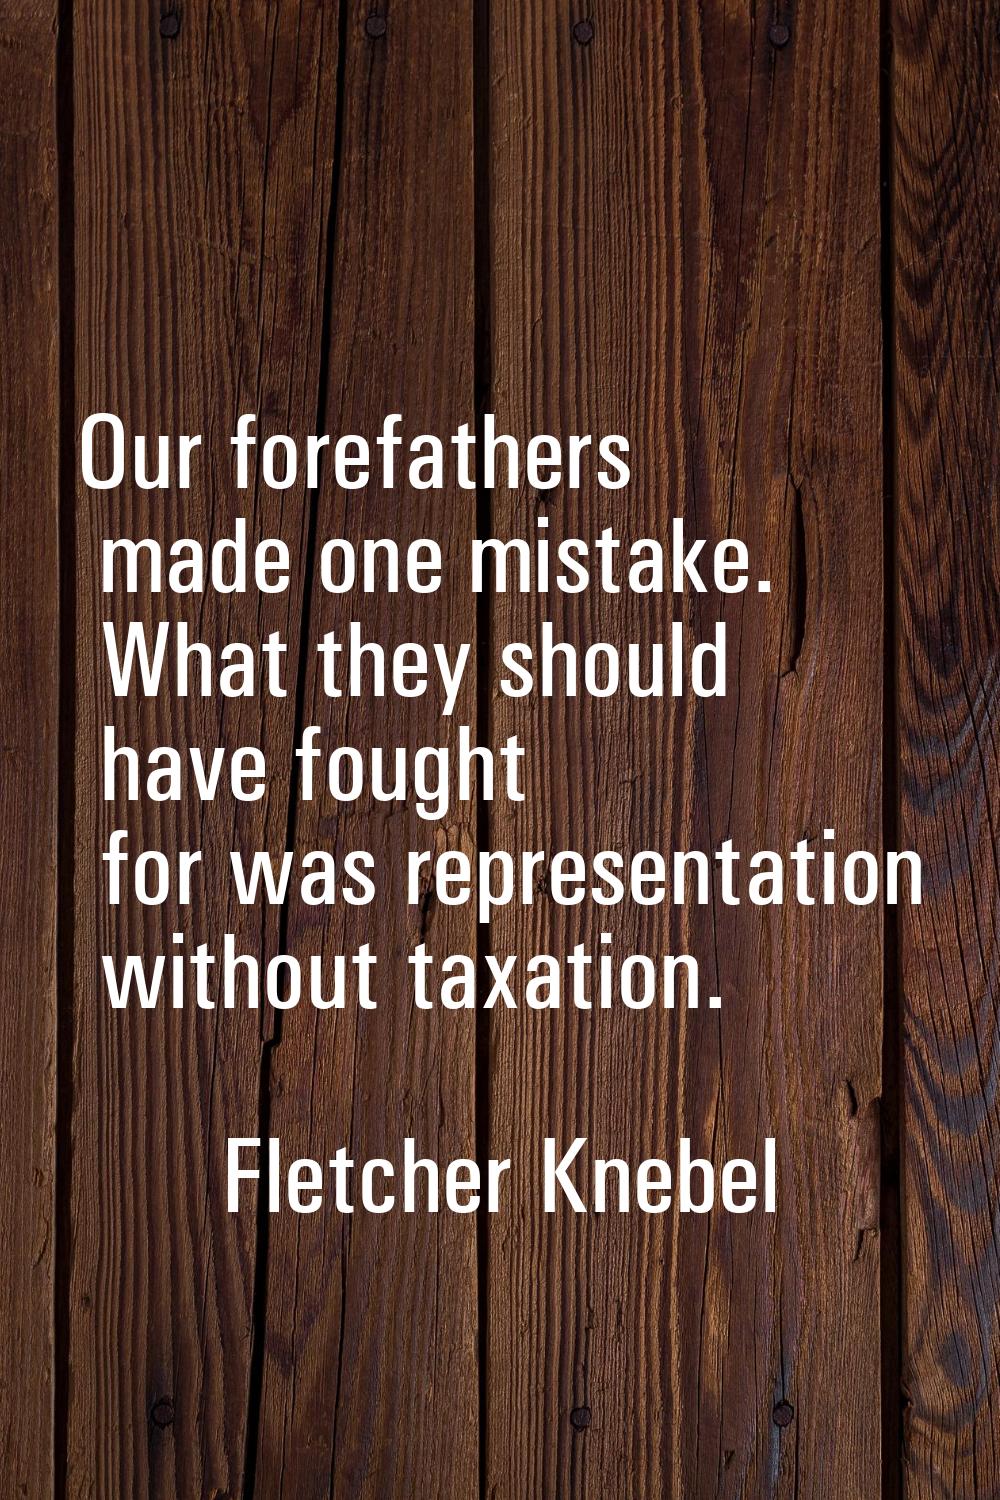 Our forefathers made one mistake. What they should have fought for was representation without taxat